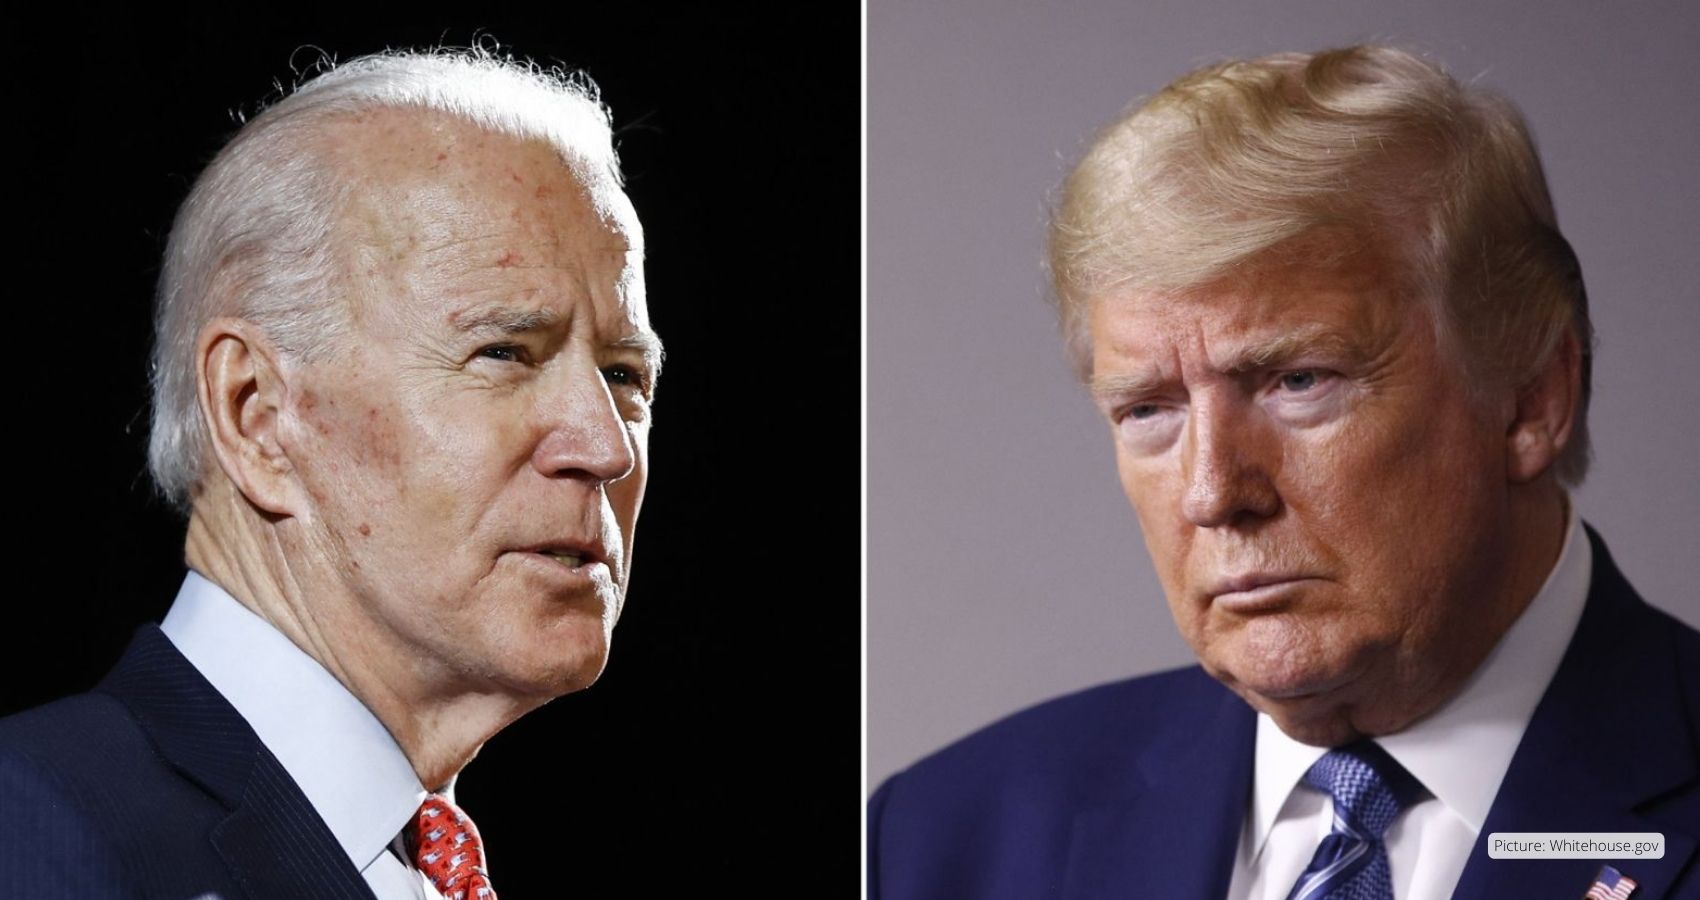 Political Earthquake: Biden and Trump Neck-and-Neck as Voter Demographics Shift